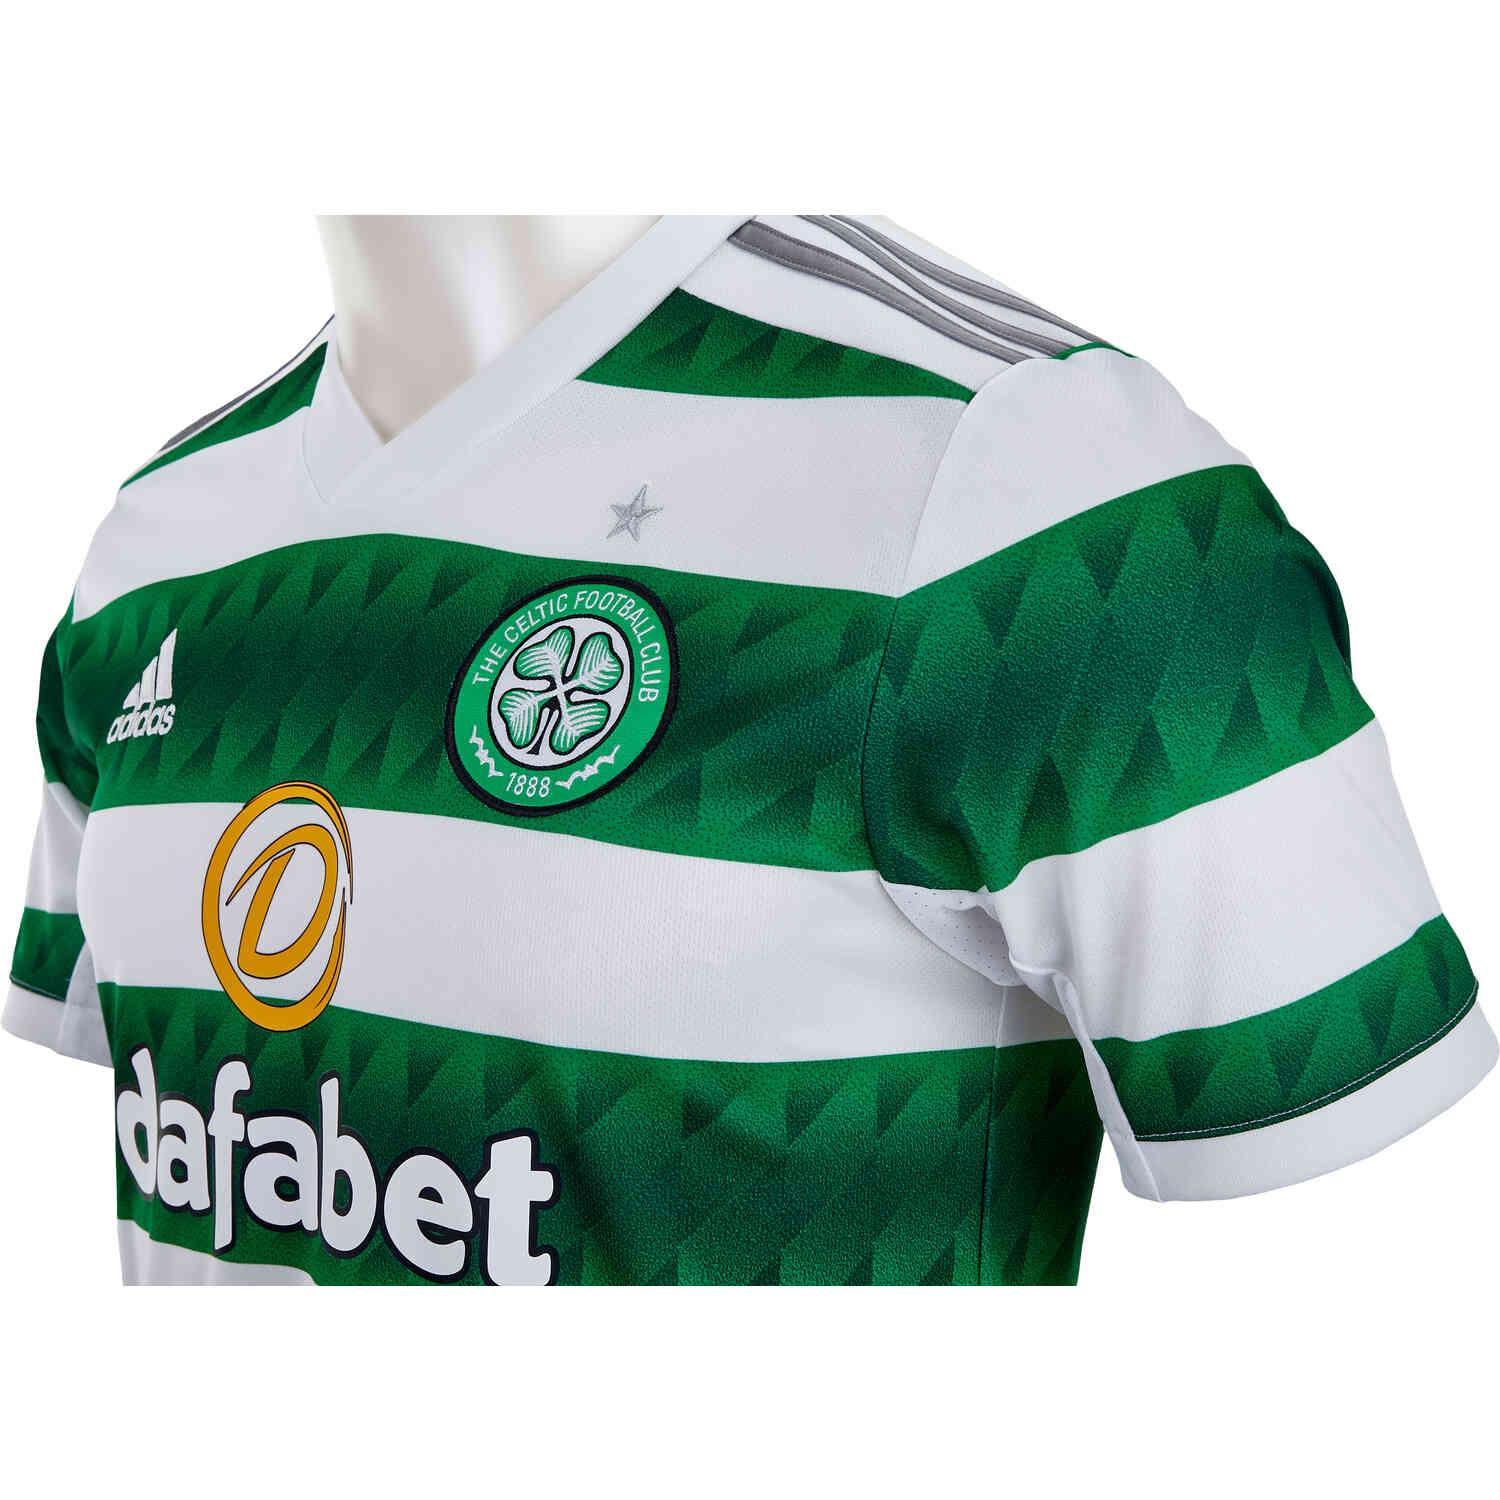 Celtic's home shirt for 2022/23 appears to have been confirmed